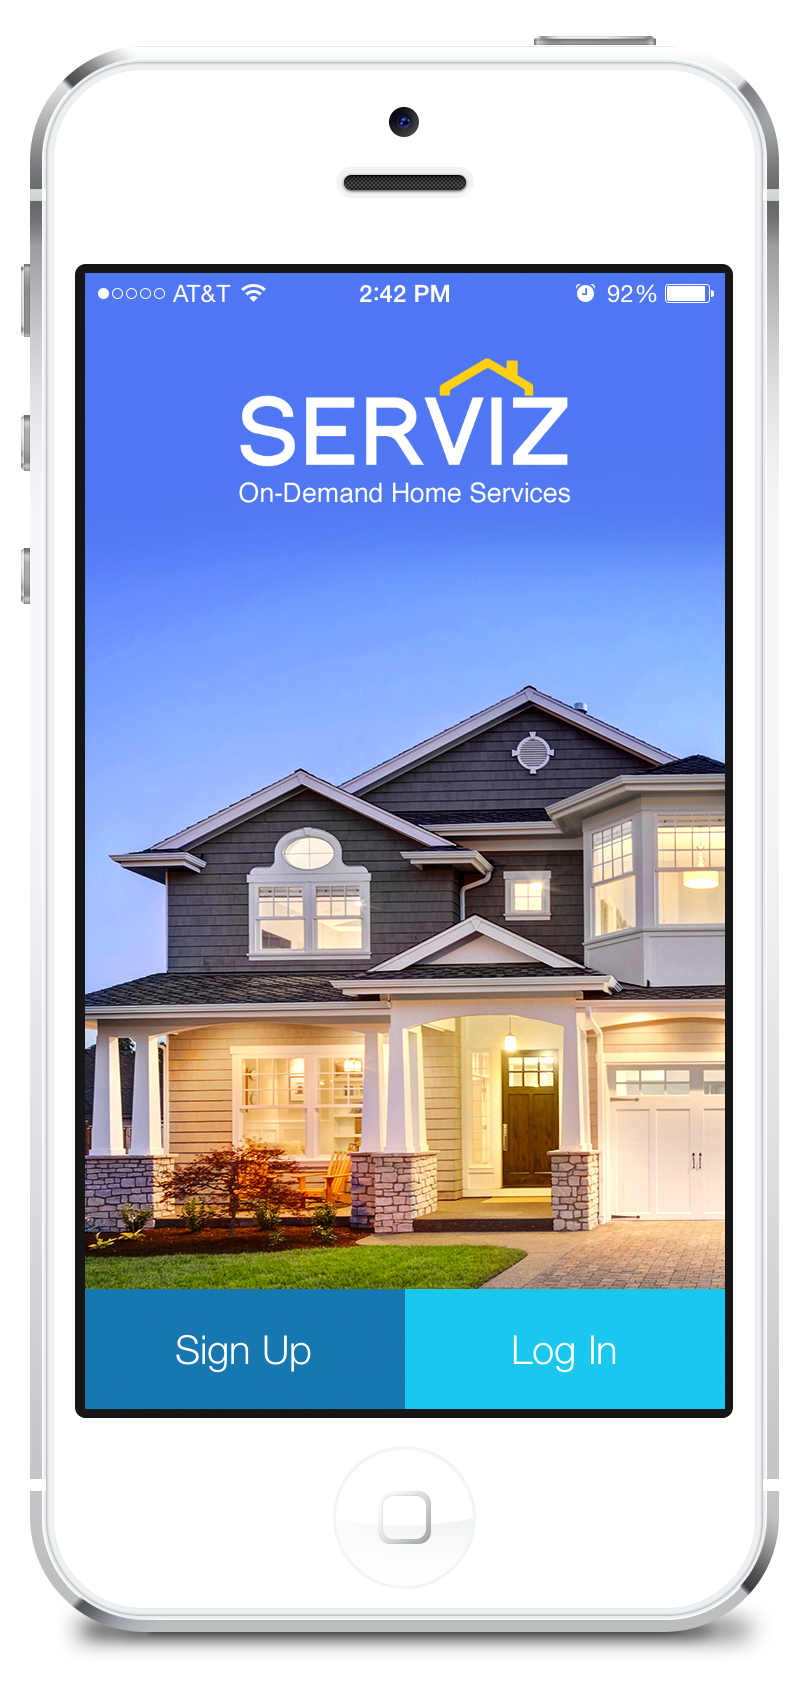 Through its easy and free app (available for both Android and iOS), SERVIZ provides homeowners in cities across America with a safer, faster and more transparent way to book and buy home services.